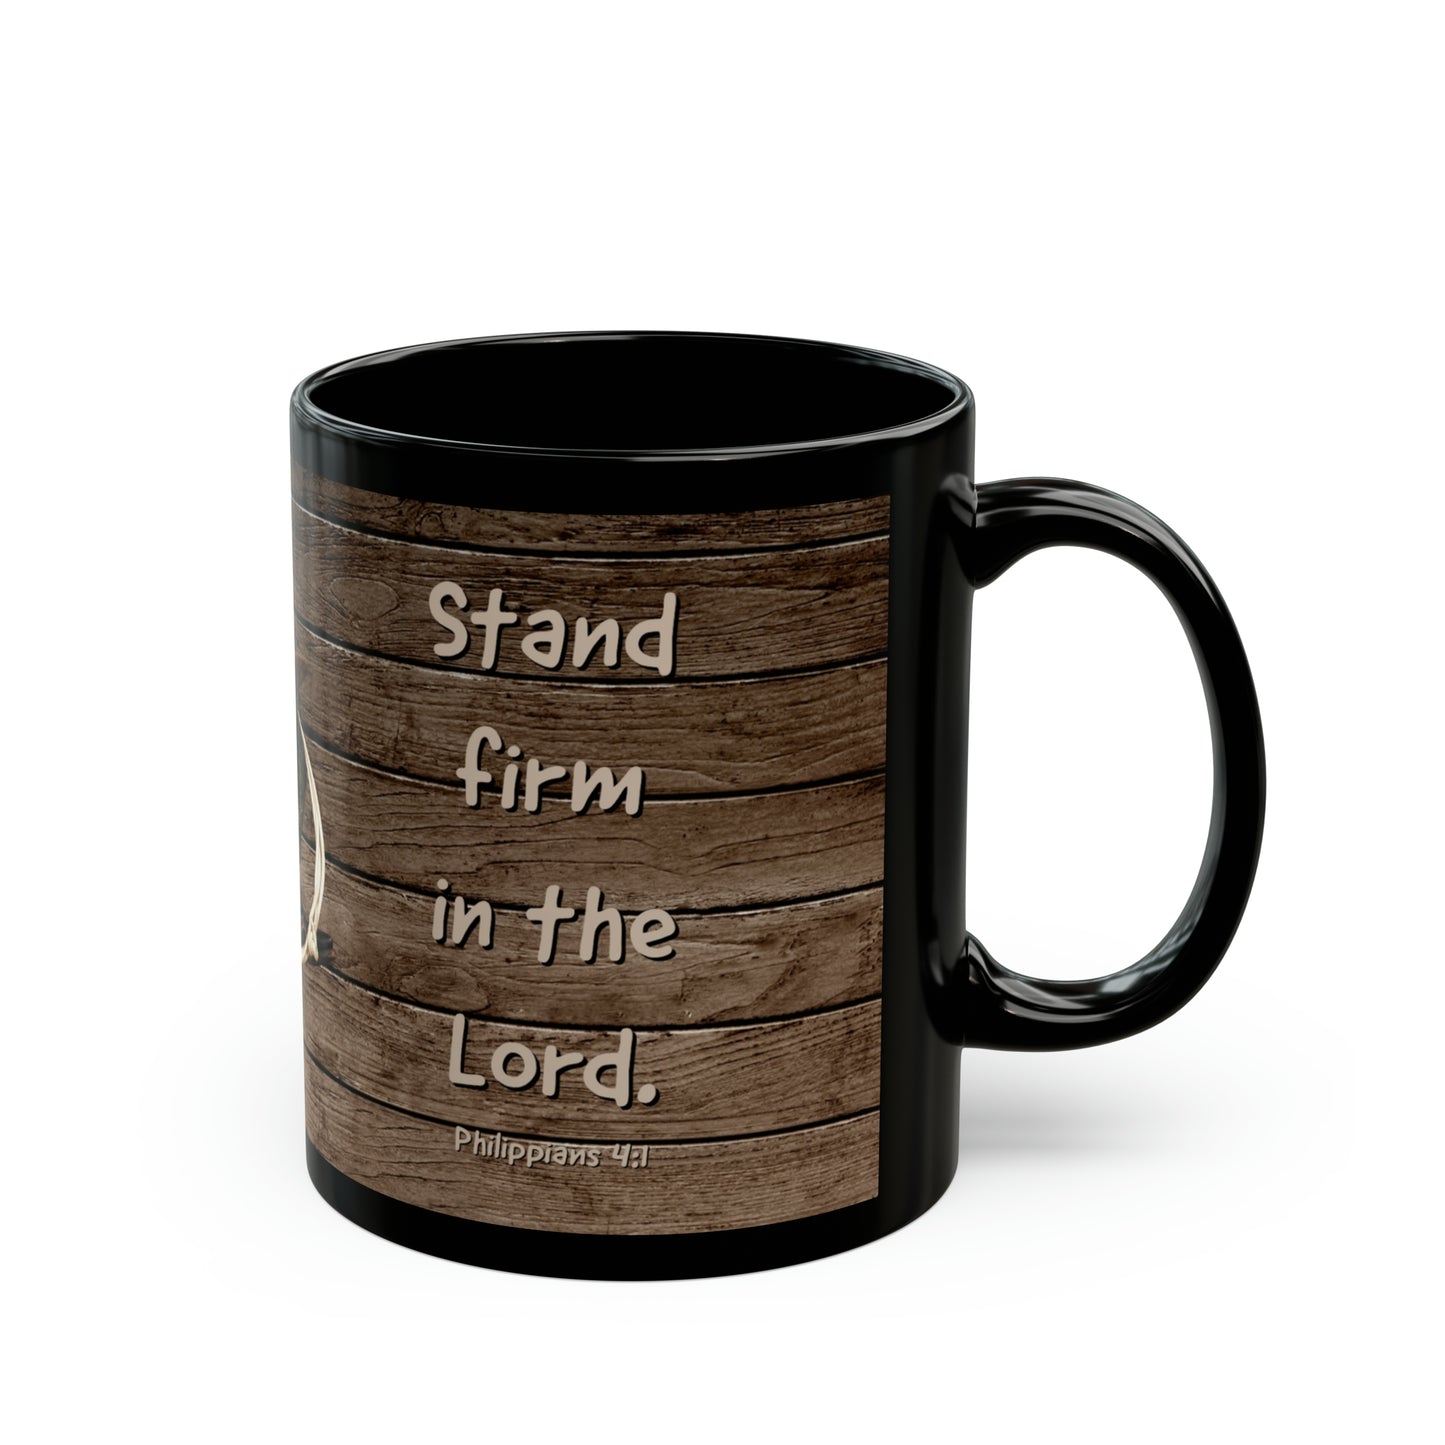 11oz Black Mug - Stand Firm in the Lord - Western Boots